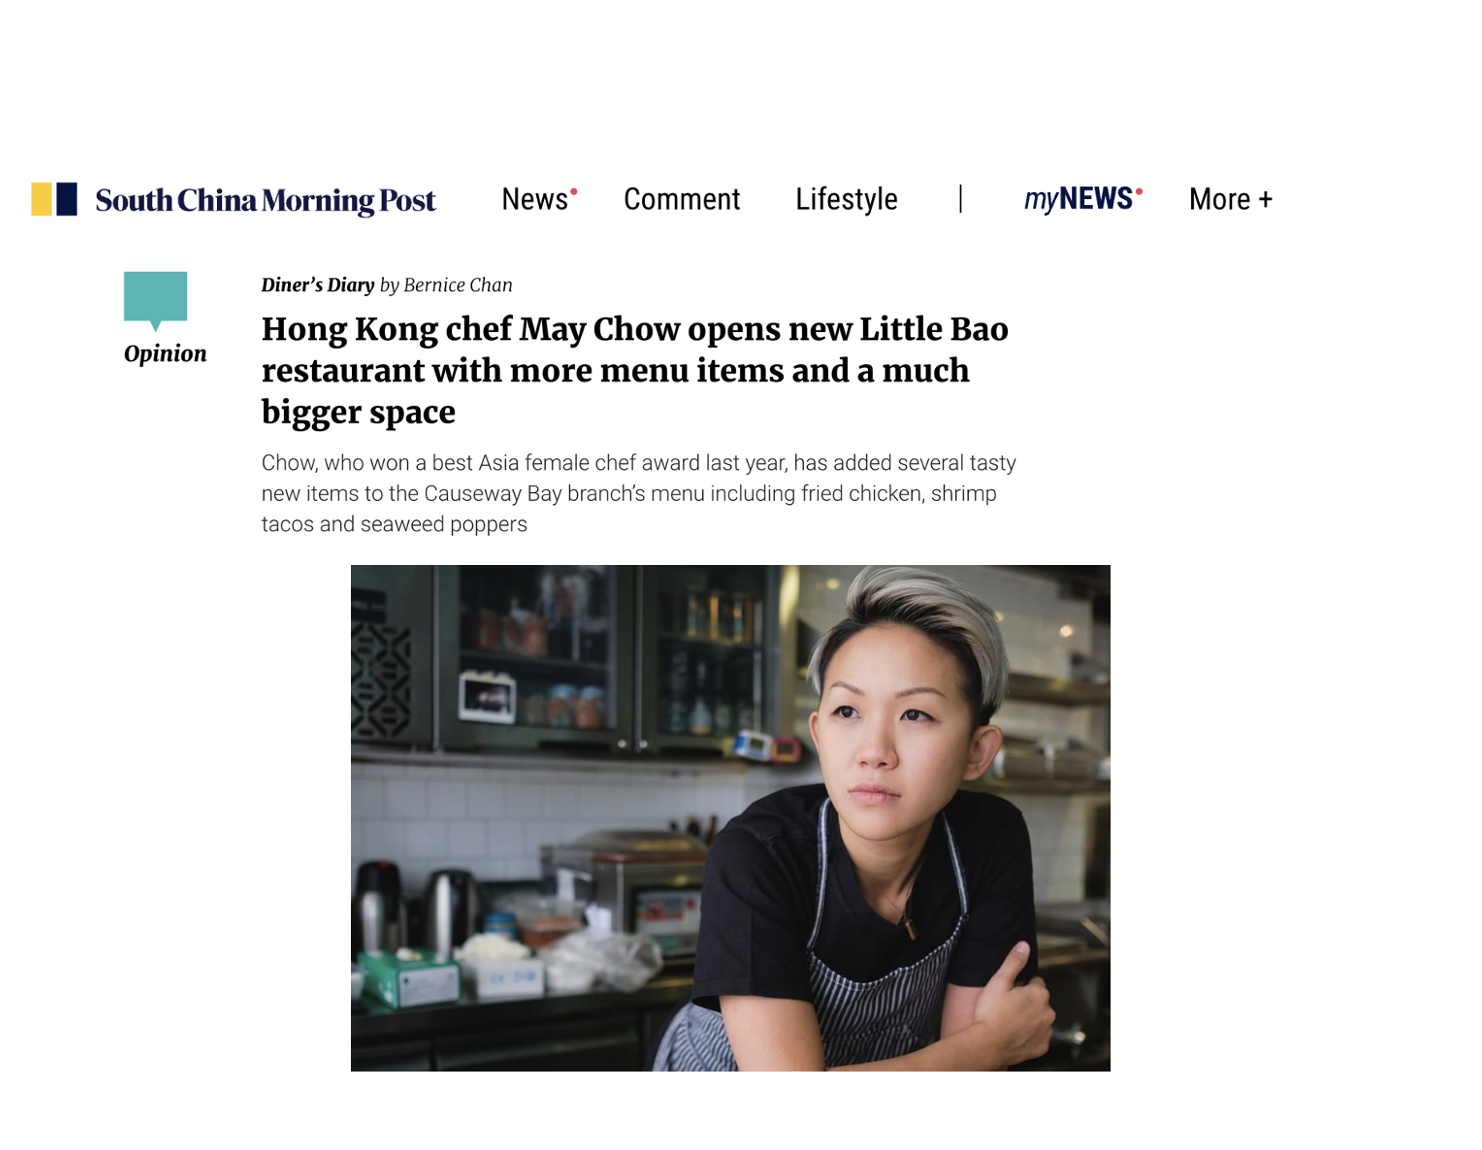 Little Bao Central Hong Kong May Chow Best Asia Female Chef 